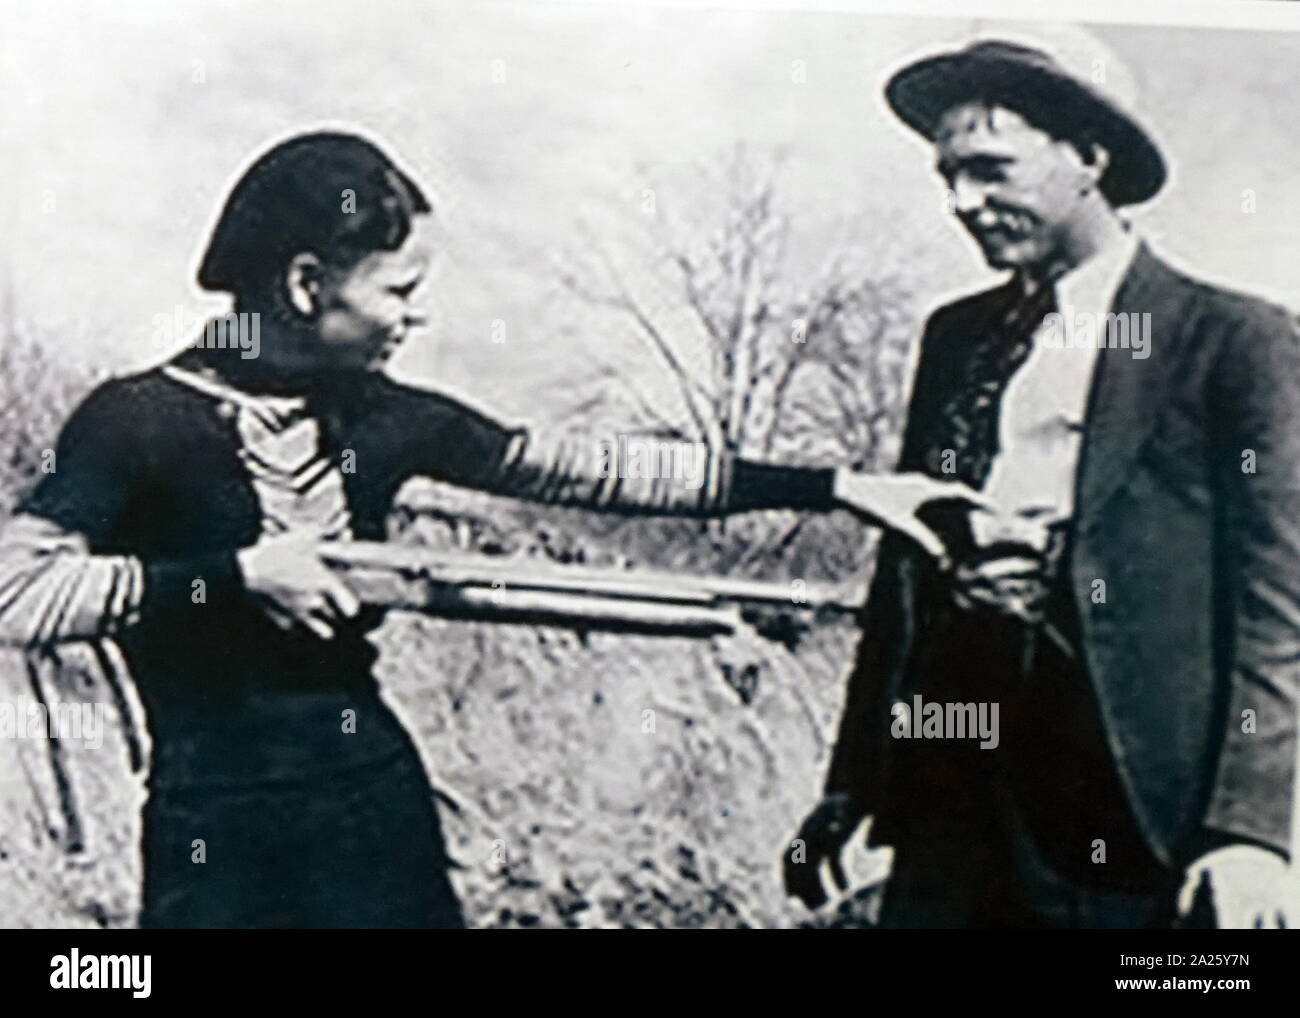 A photograph of Bonnie and Clyde. Bonnie Elizabeth Parker (1910-1934) and Clyde Chestnut Barrow (1909-1934) American criminals who travelled around the Central United States with their gang during the Great Depression. Stock Photo